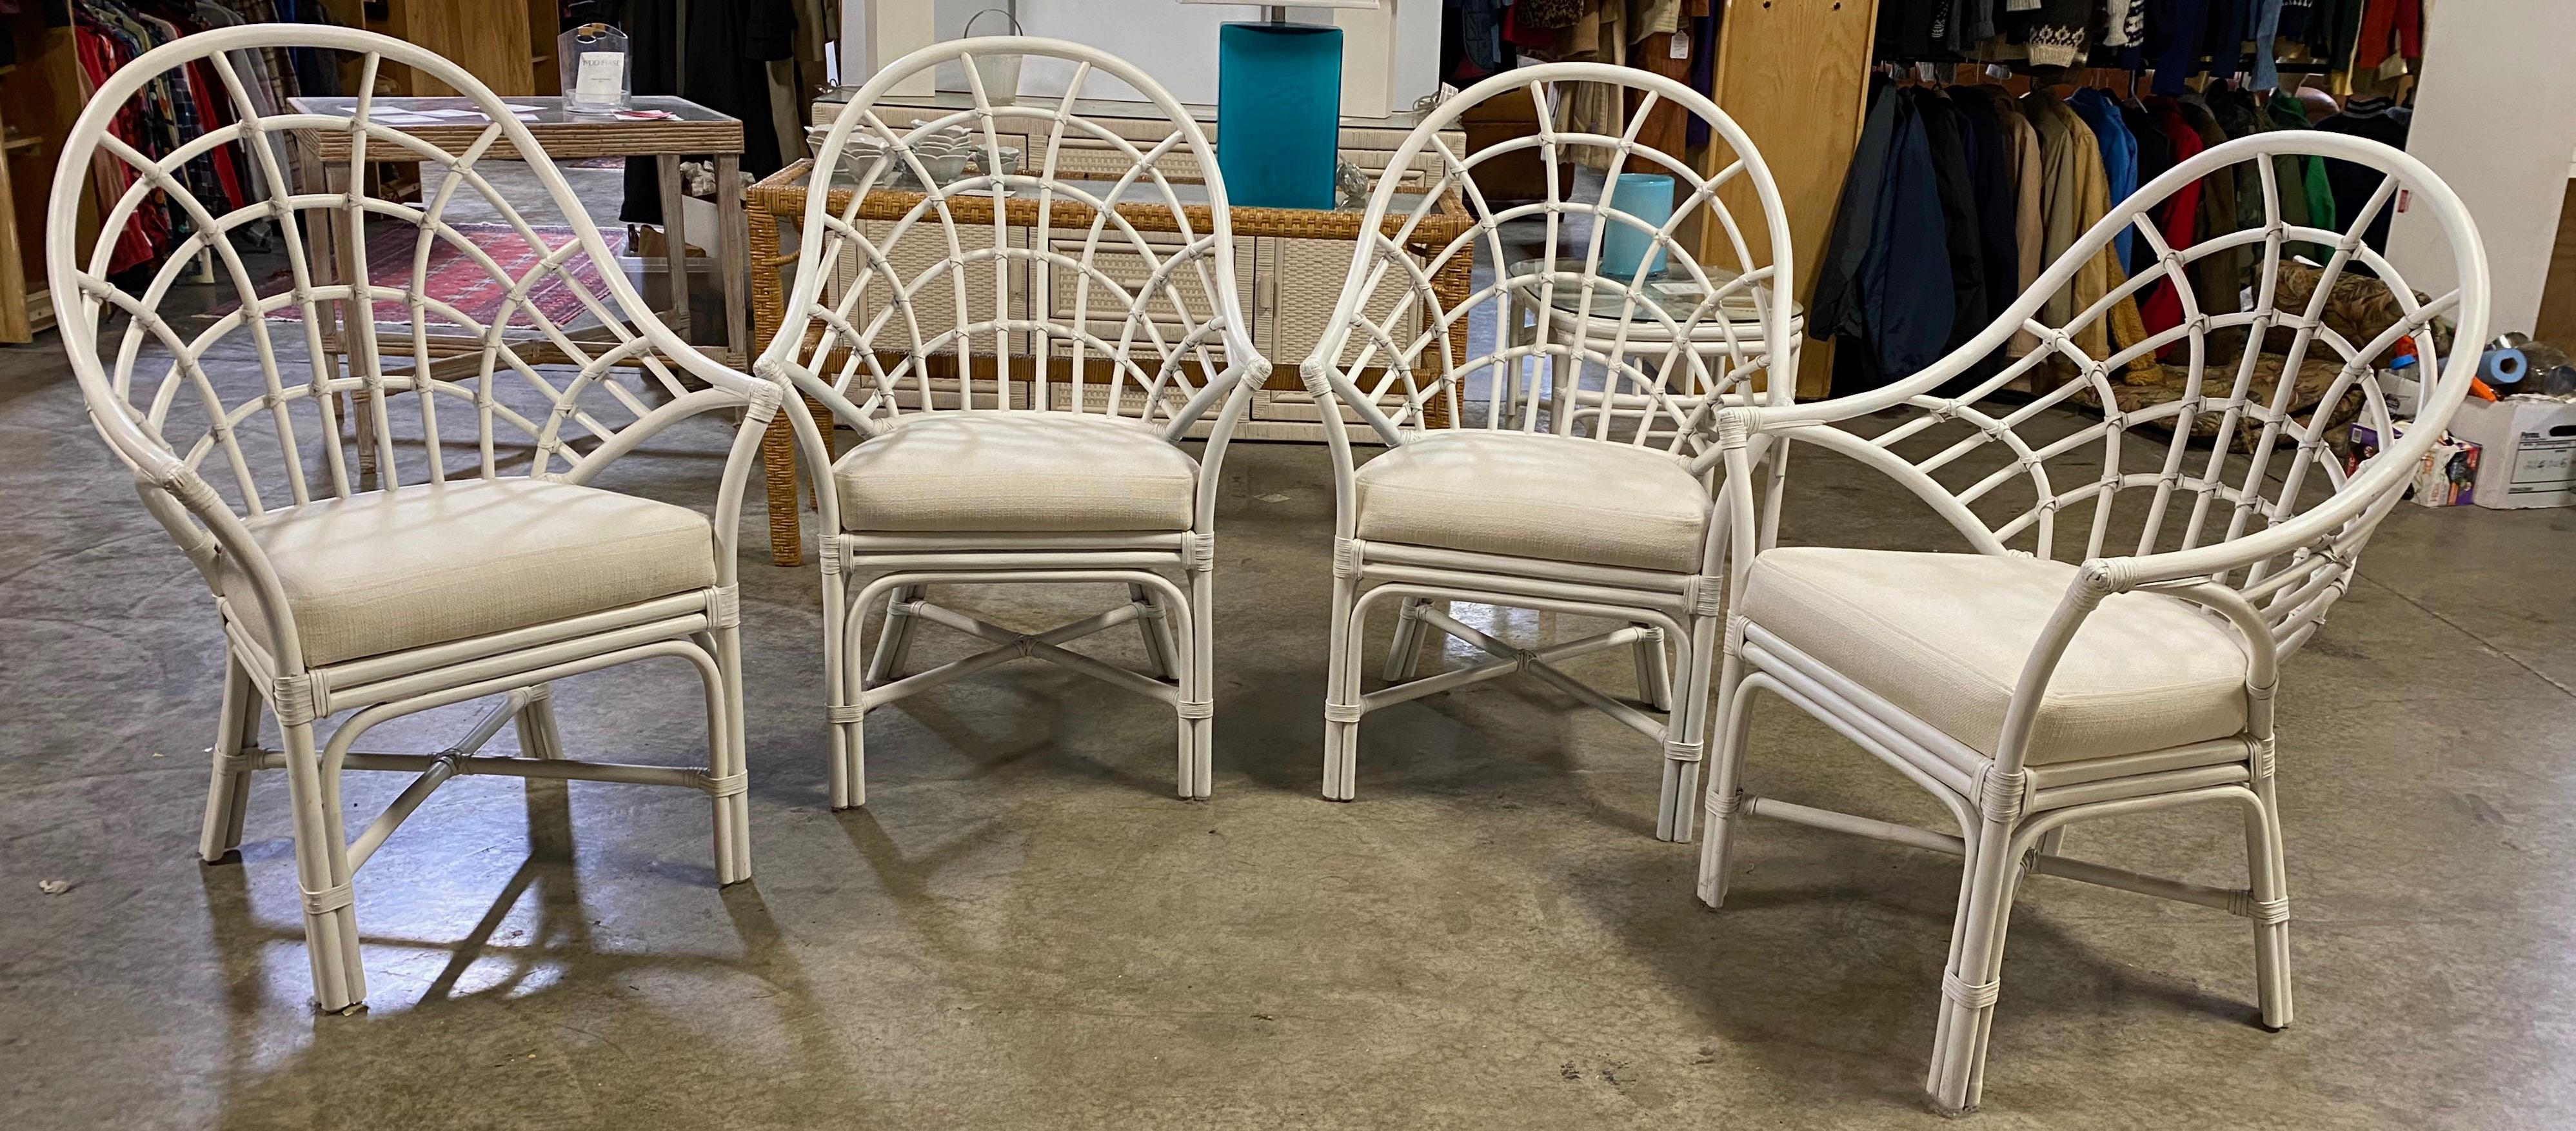 Add style and comfort to your dining experience with this set of 4 Mid-Century Modern Bohemian Chic rattan, wicker pencil reed fan back dining chairs. 
Use these high back white painted chairs on the porch or patio or a sun filled kitchen or dining